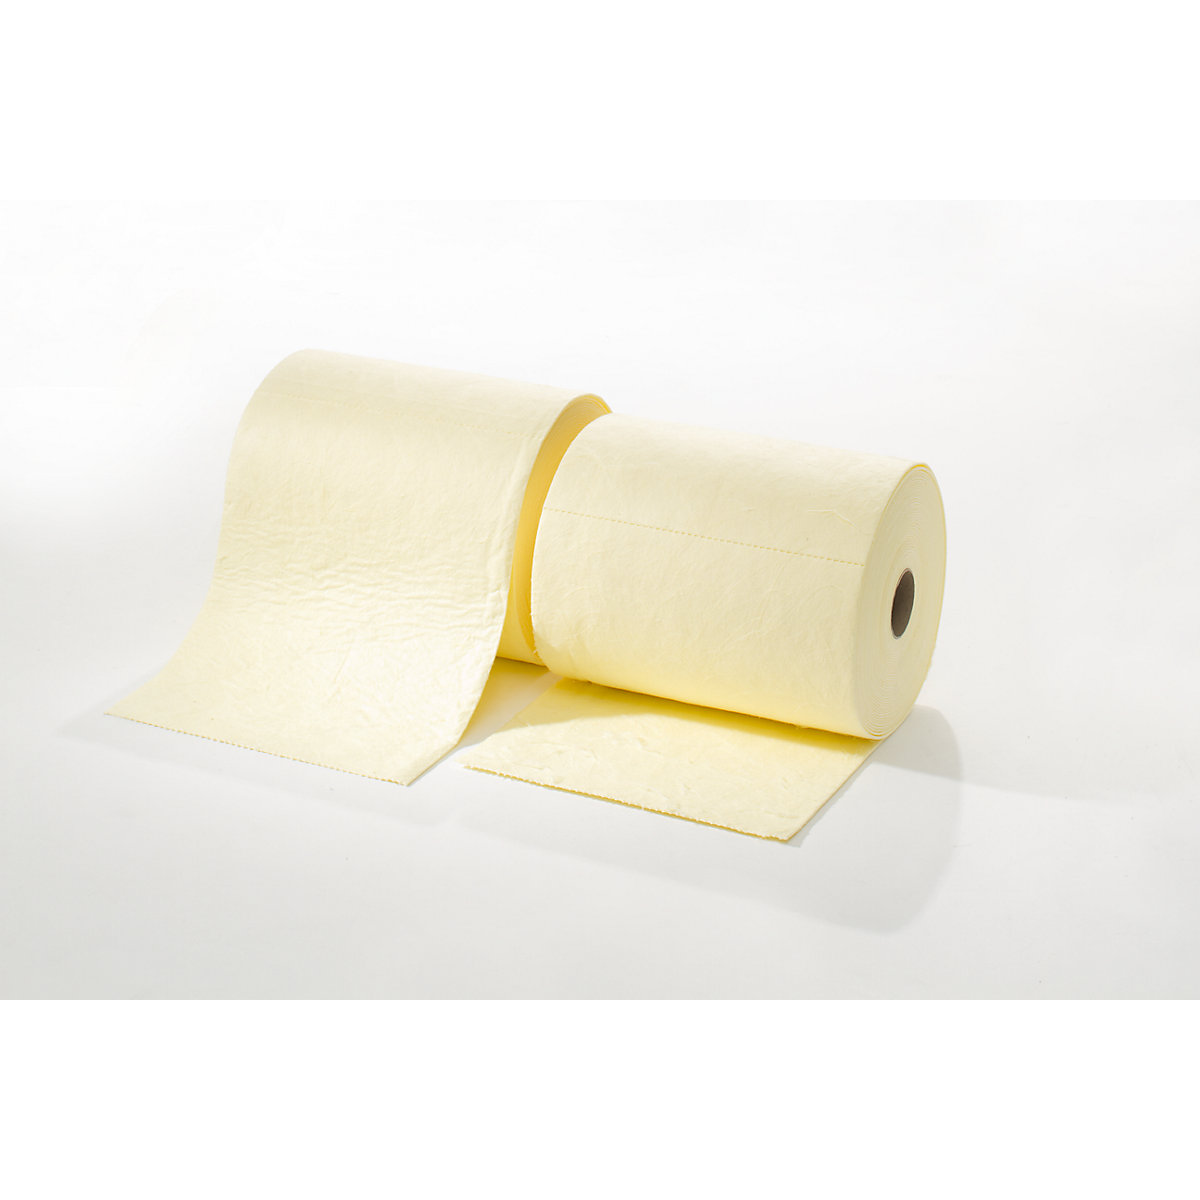 FIRST absorbent sheeting, roll of sheeting, heavy version, for chemicals, 400 mm x 40 m, pack of 2 rolls-12